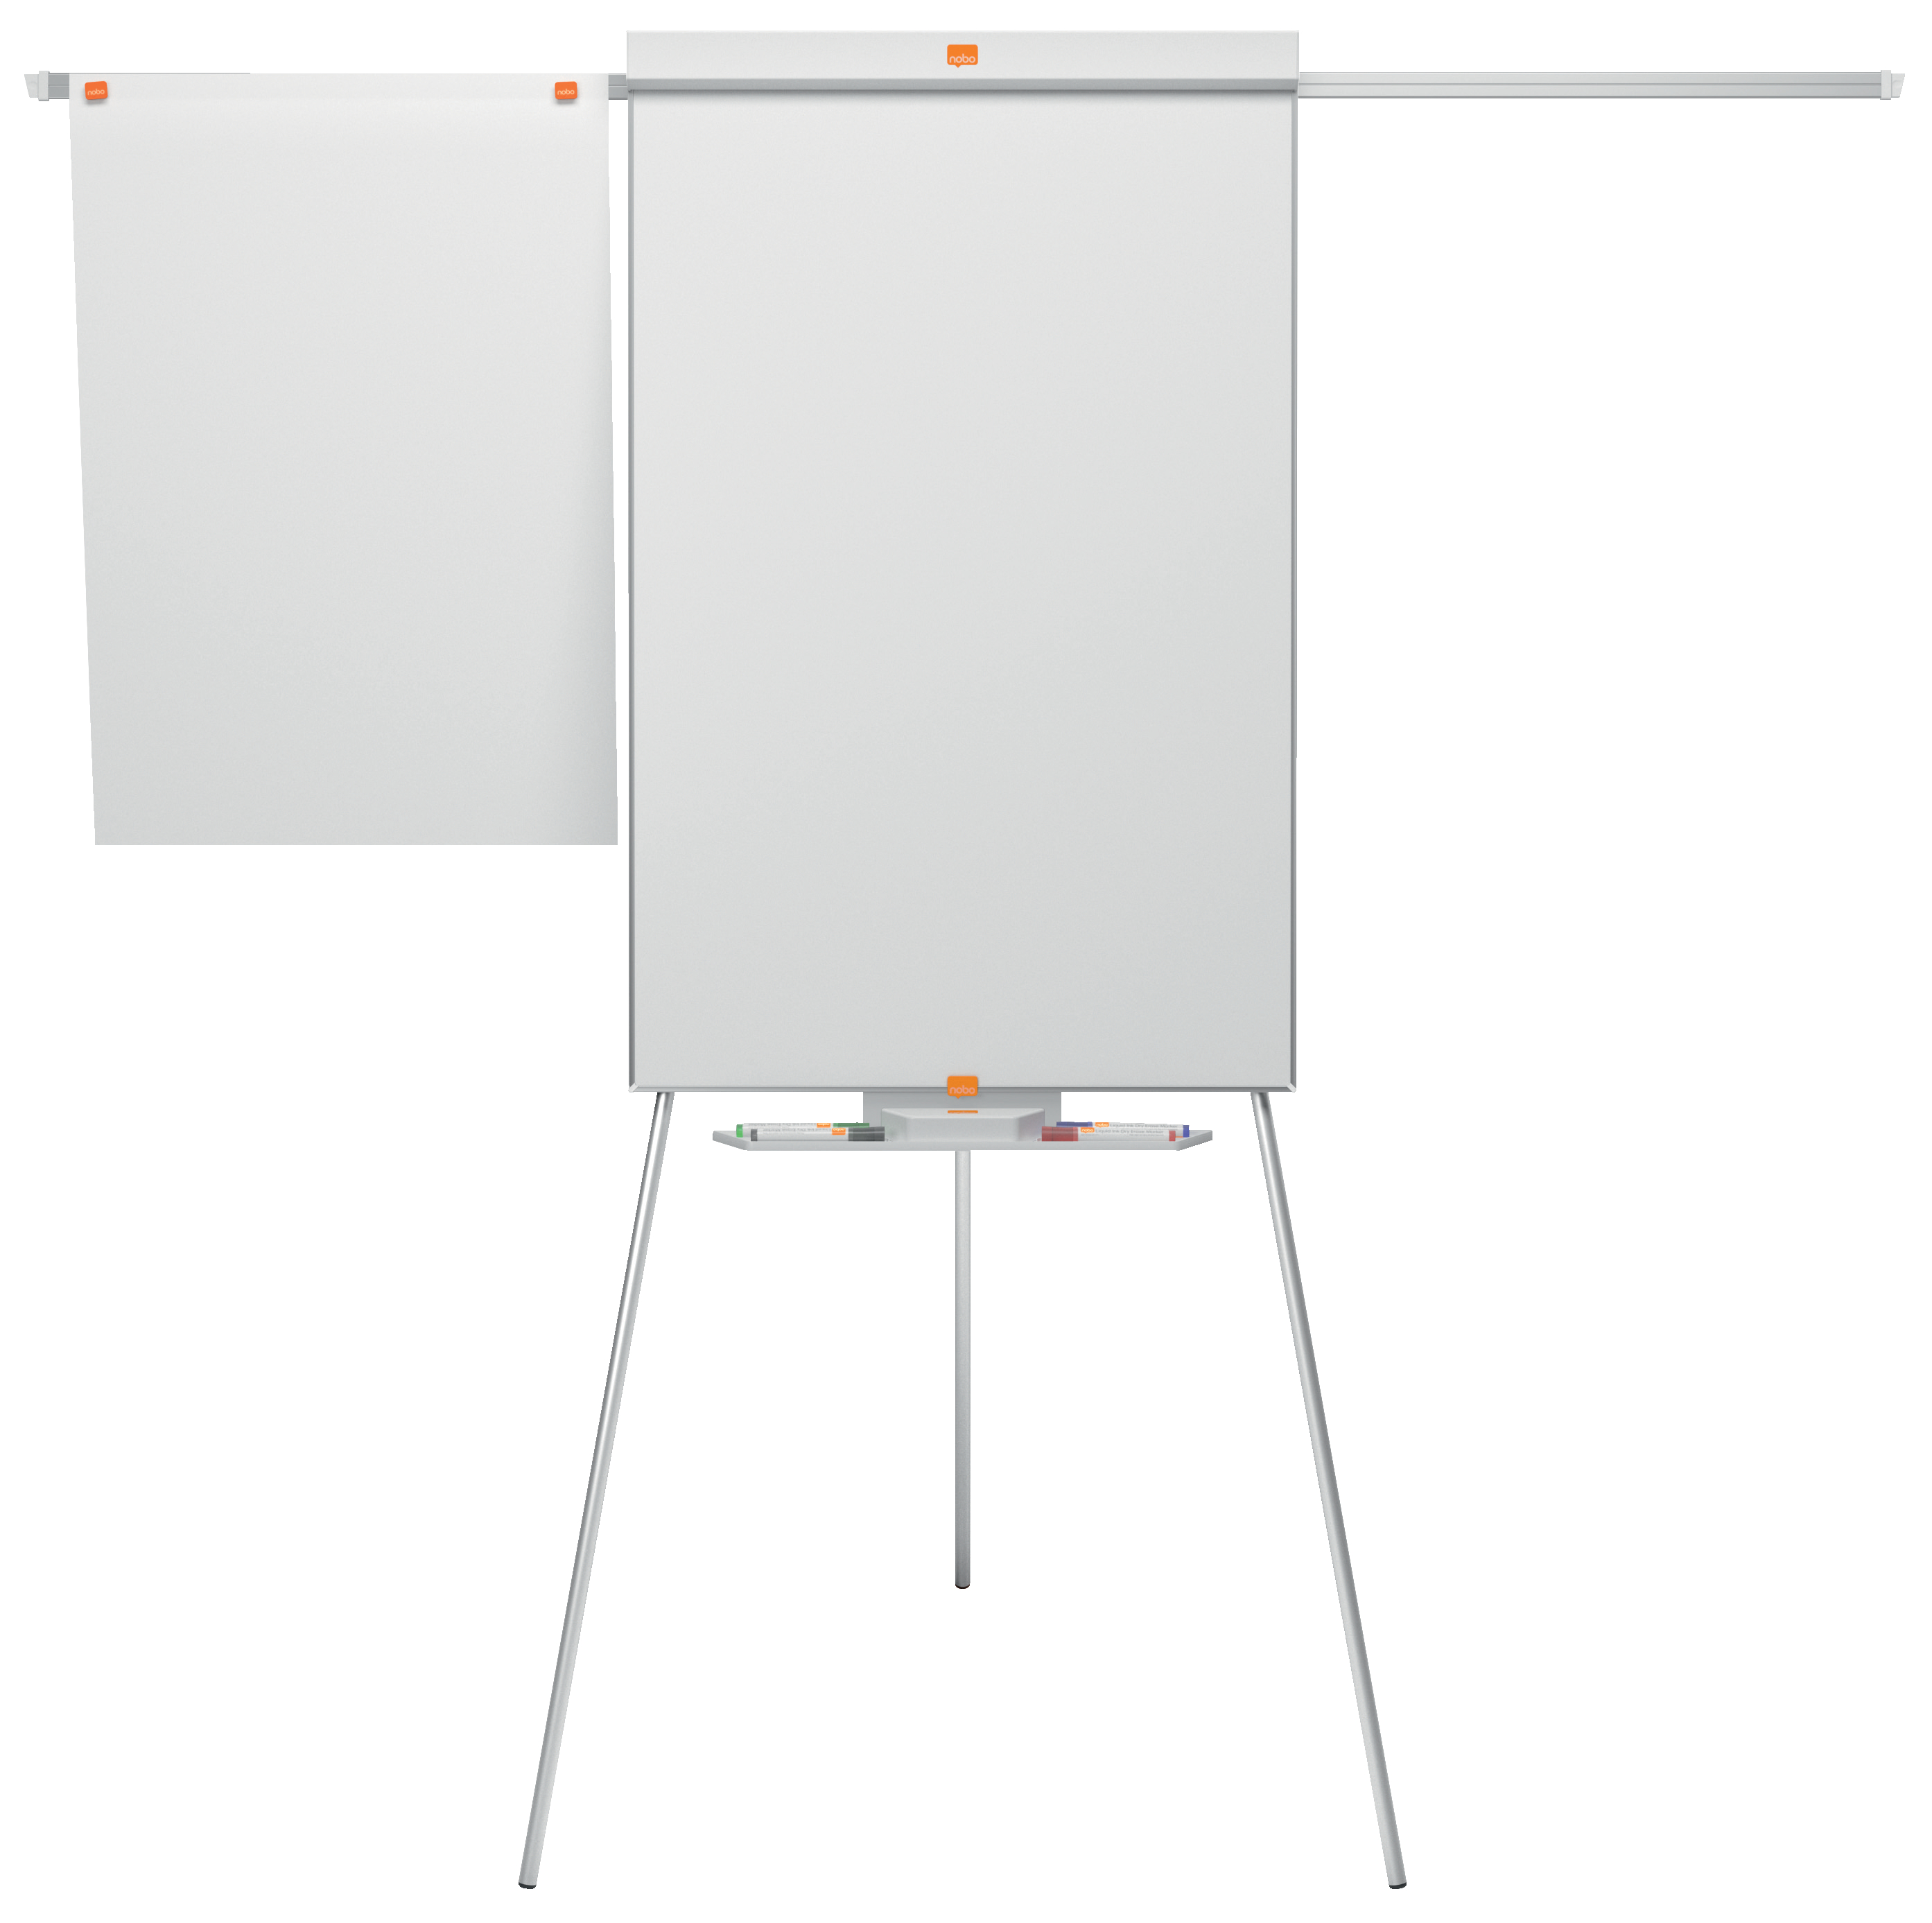 Flip chart: stand model with side arms